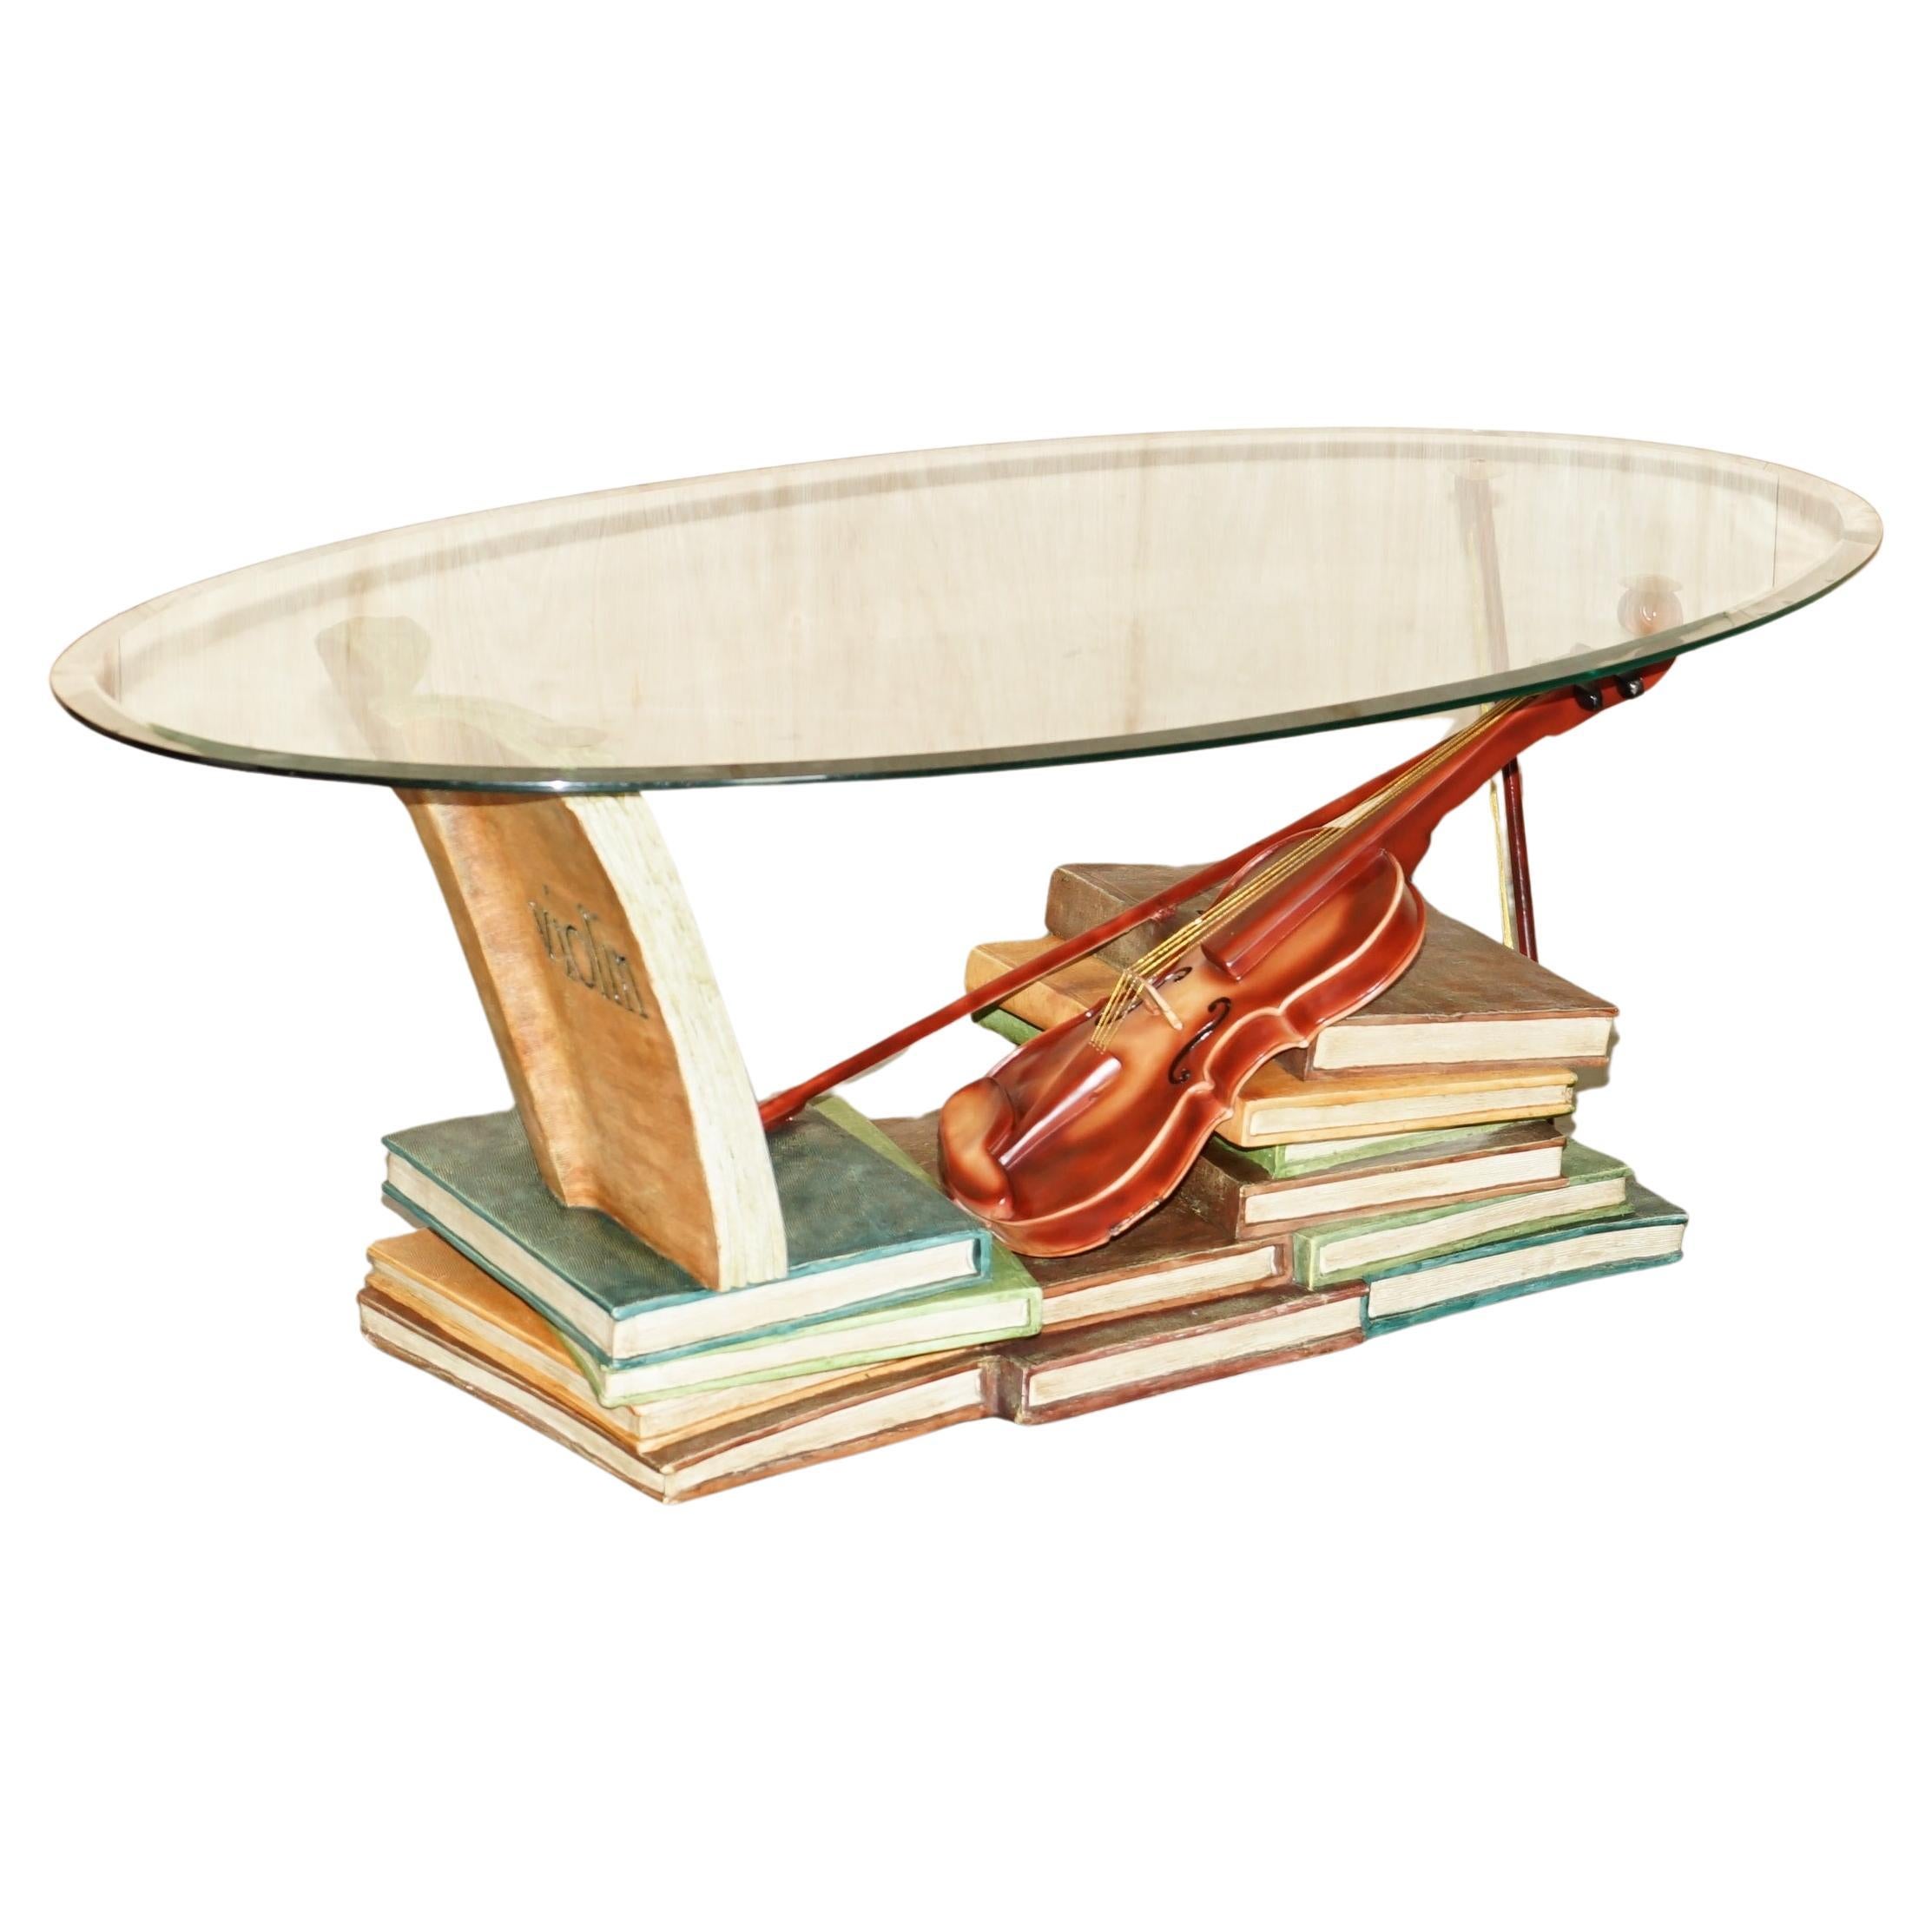 SUPER DECORATIVE MOZART STACKED BOOKS & VIOLIN COFFEE TABLE WiTH GLASS OVAL TOP For Sale